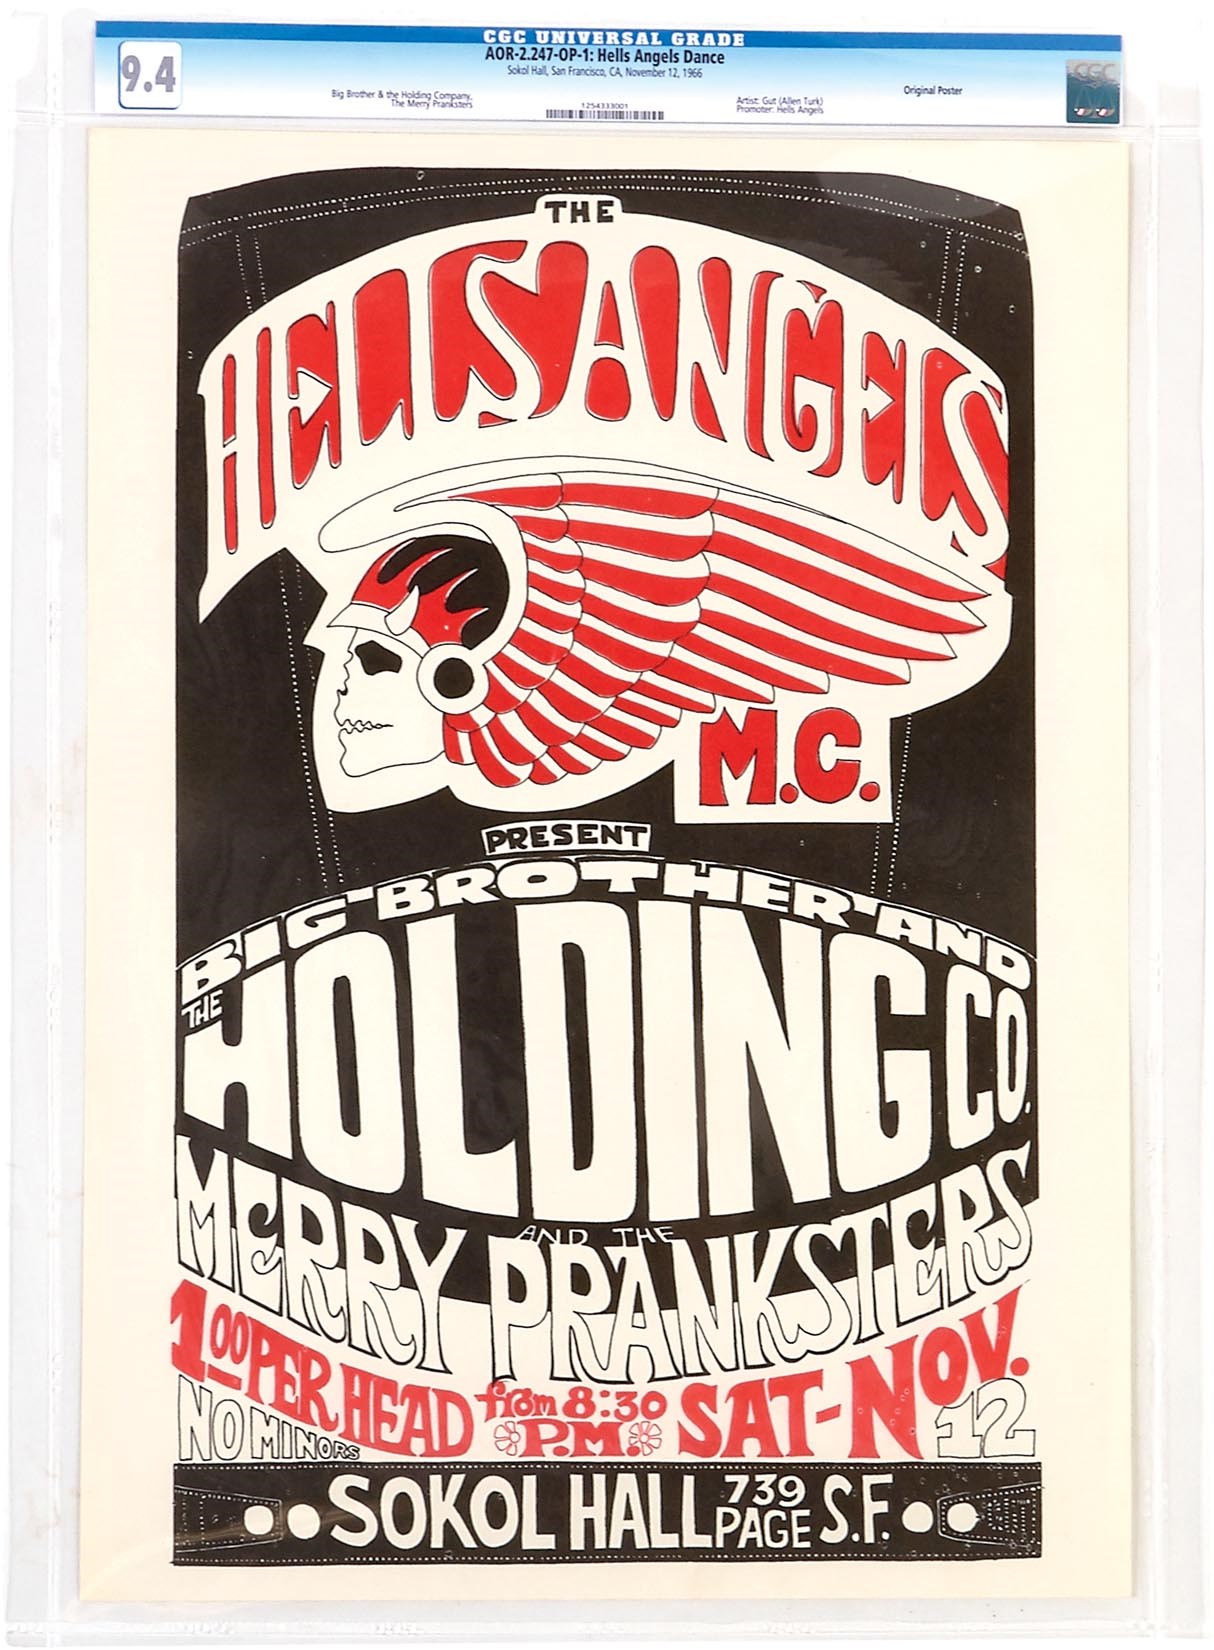 Rock And Pop Culture - First Printing 1966 Hells Angels Poster by Gut w/Grateful Dead, Janis Joplin & Ken Kesey (CGC Graded 9.4 NM)